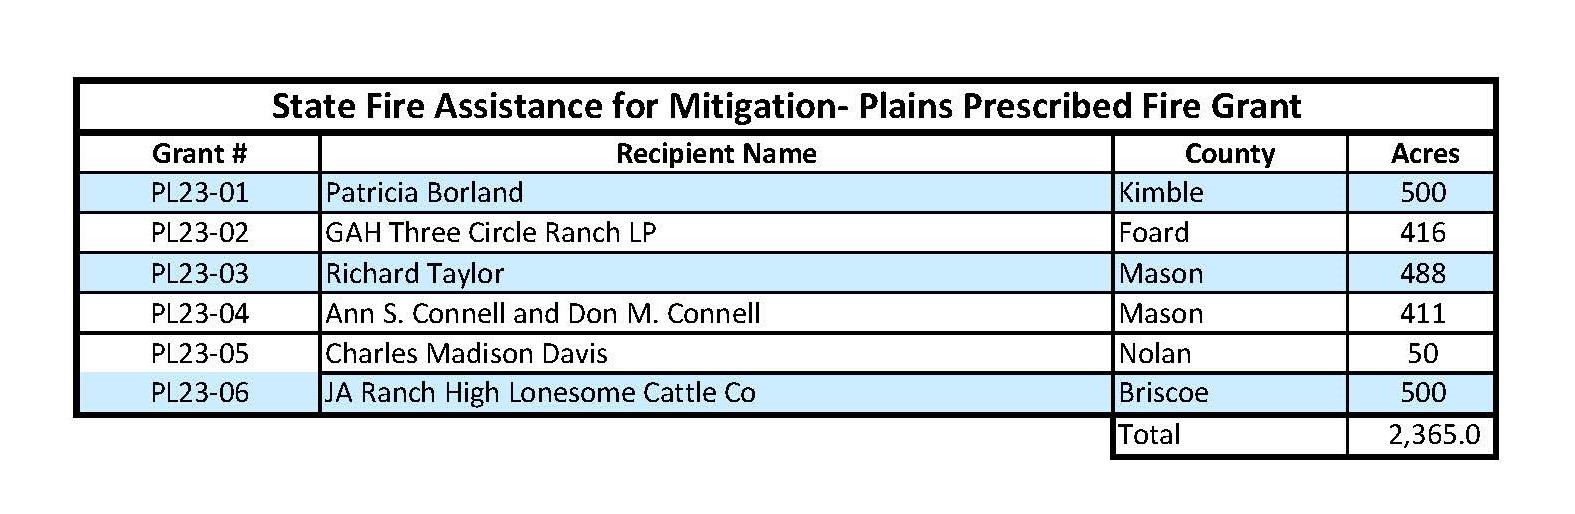 2023 State Fire Assistance for Mitigation - Plains Prescribed Fire Grant Recipients